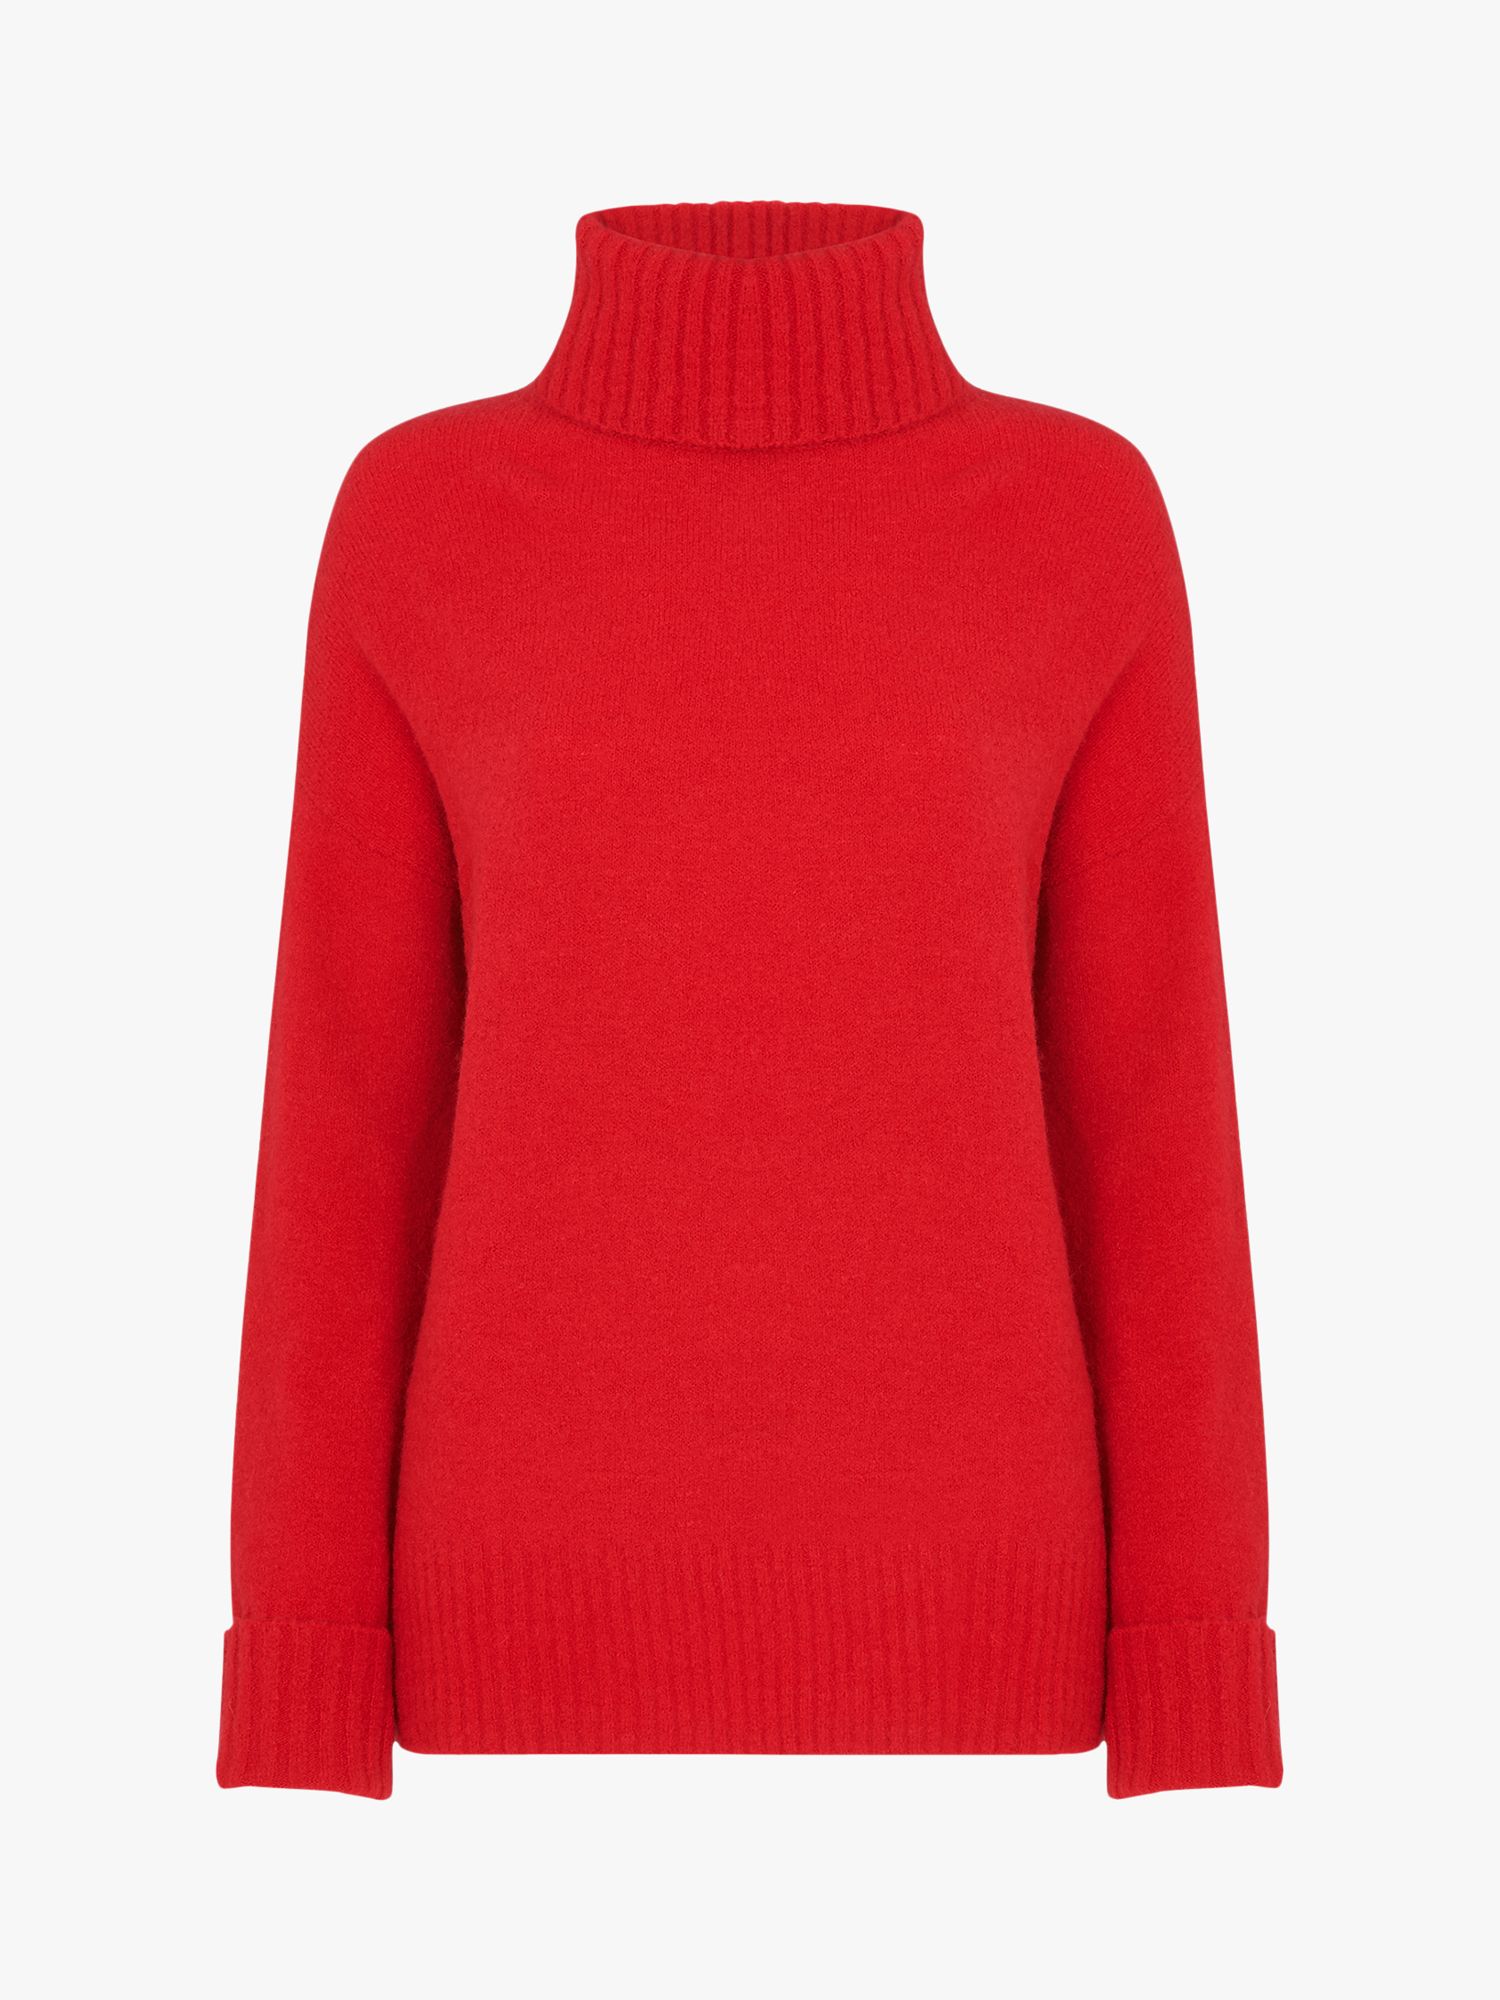 Whistles Oversized Roll Neck Jumper, Red at John Lewis & Partners